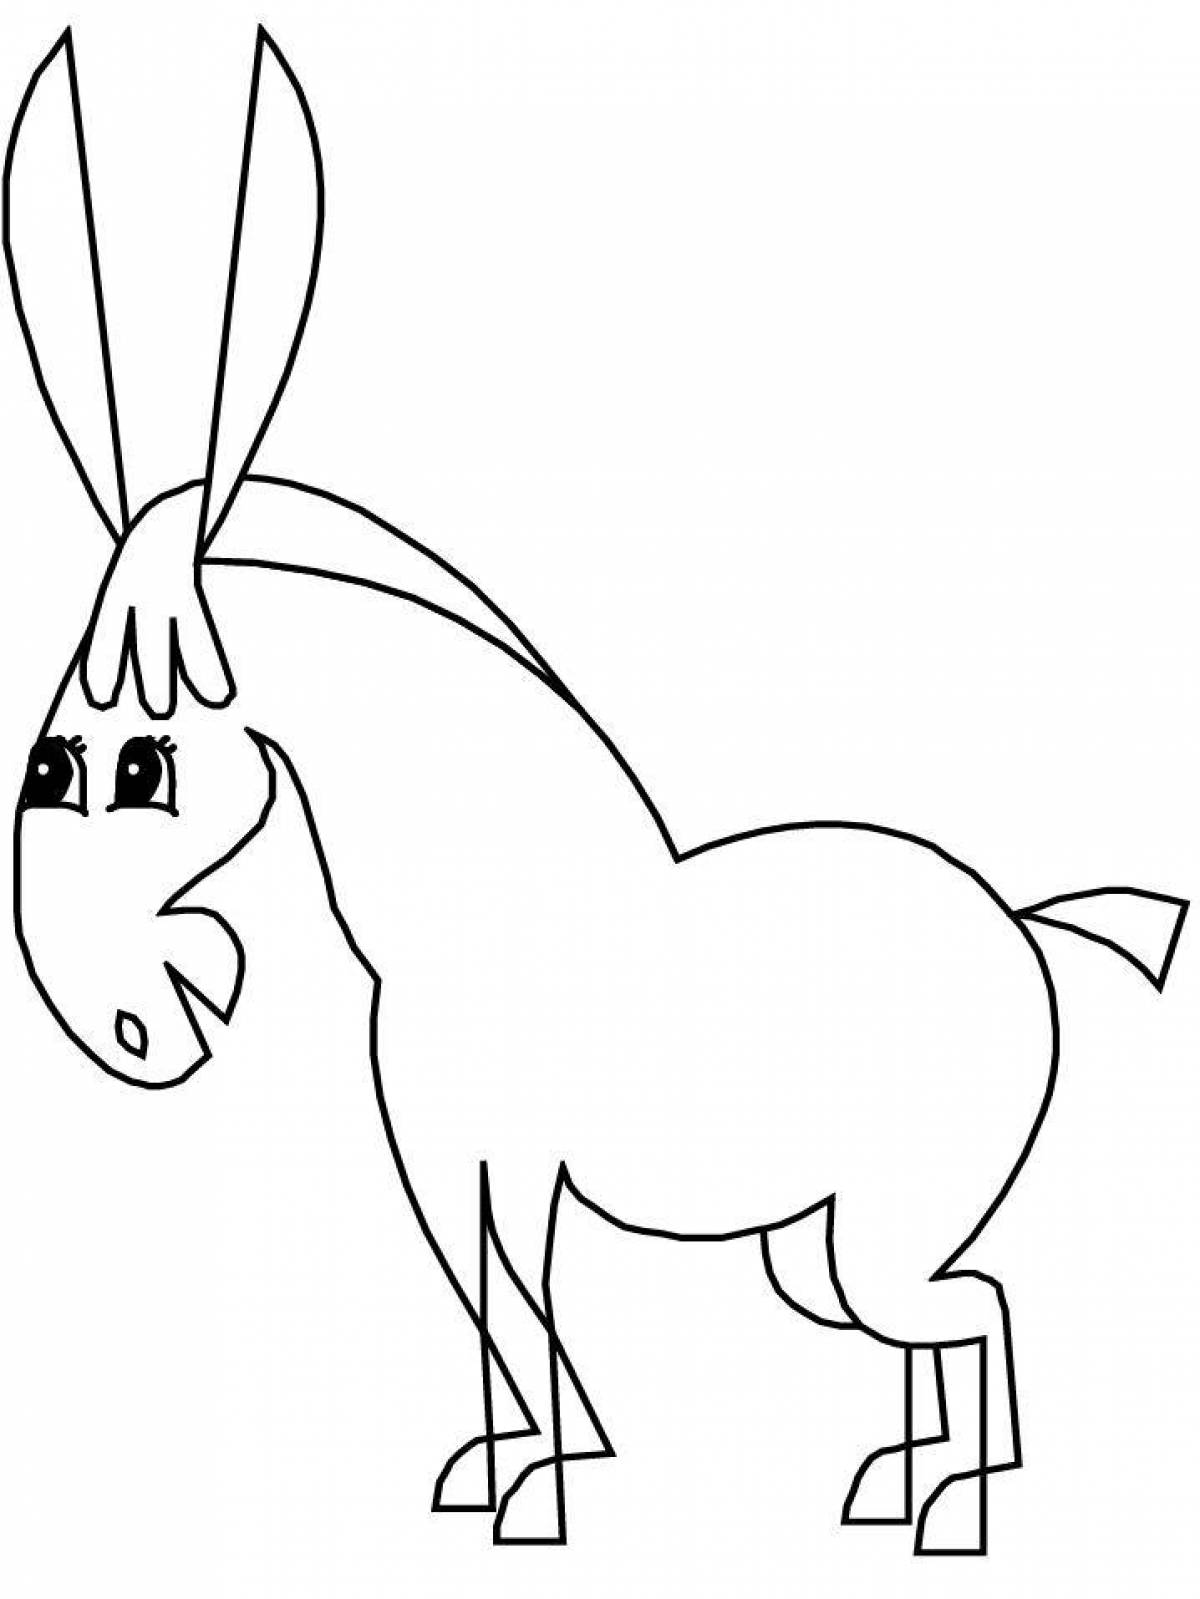 Playful donkey coloring for kids